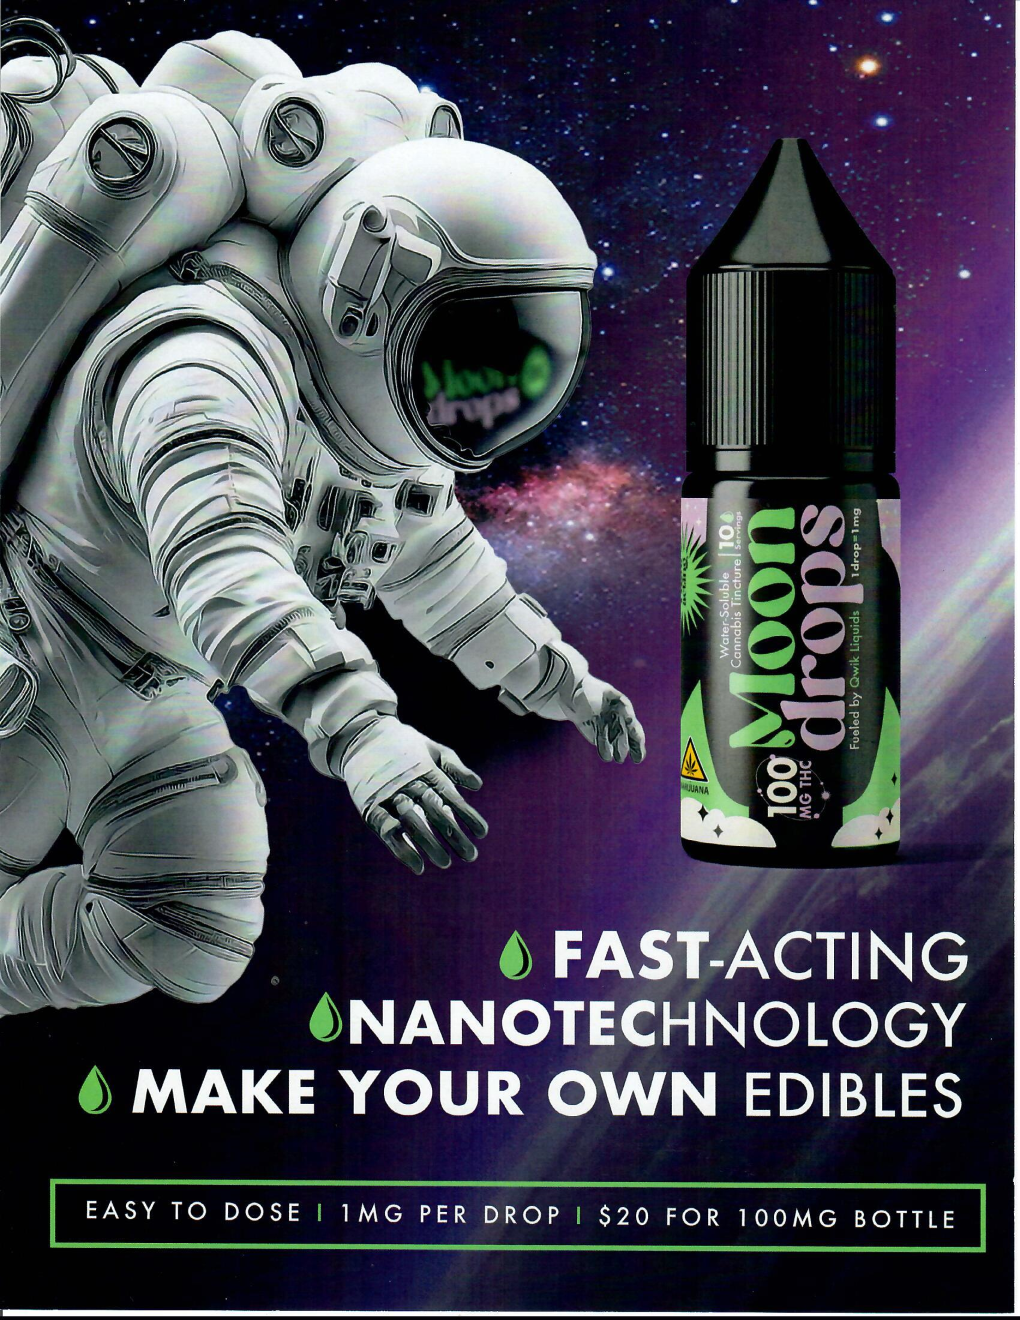 Moon Drops (Tincture oil) 98.40 mg THC